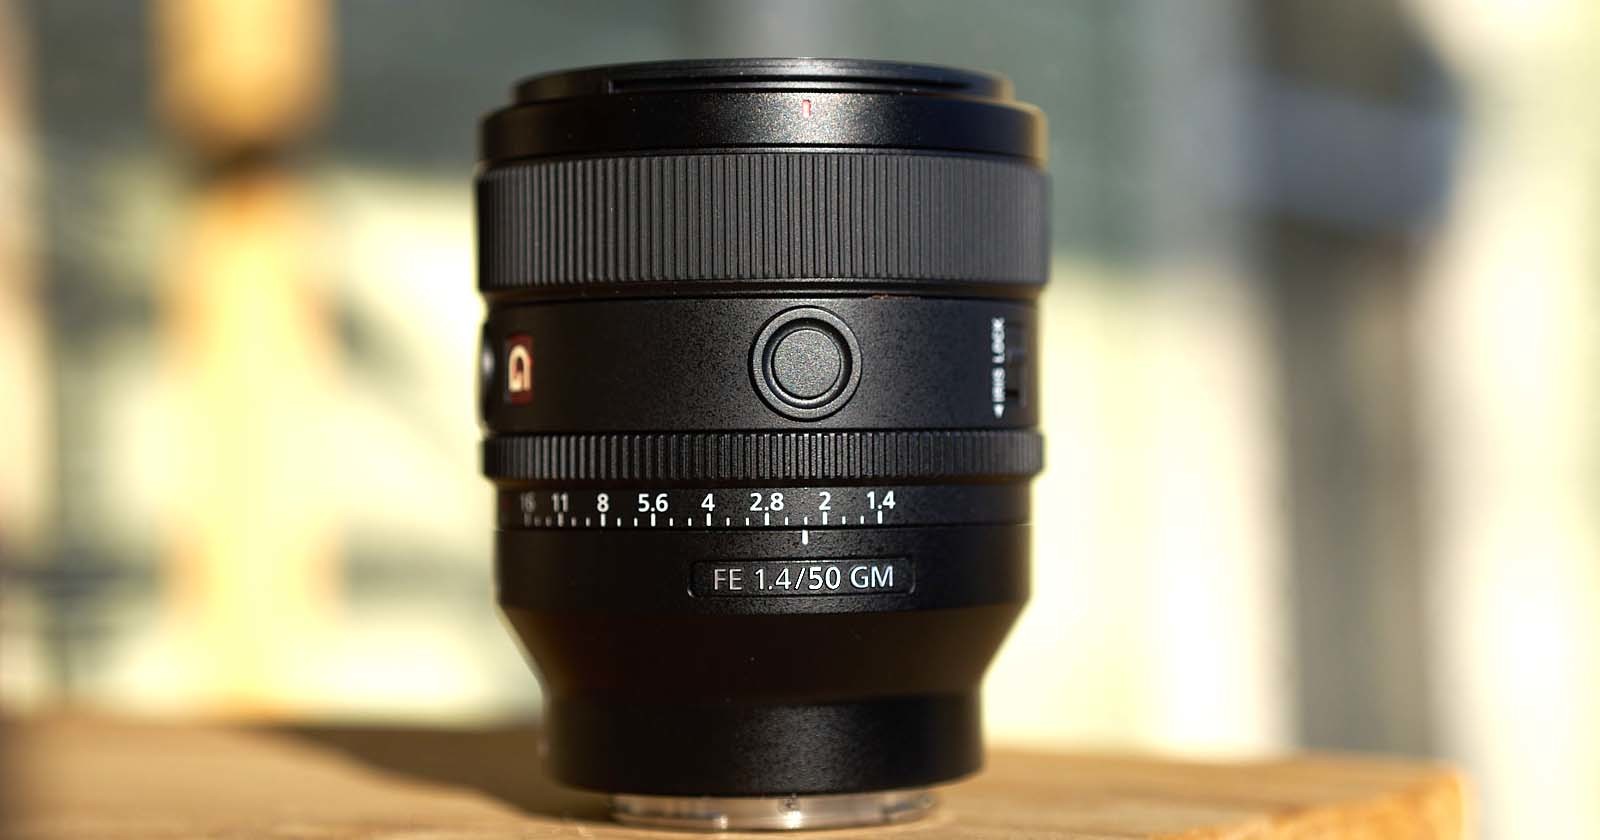 Sonys New 50mm f/1.4 GM Lens is Smallest and Lightest in its Class